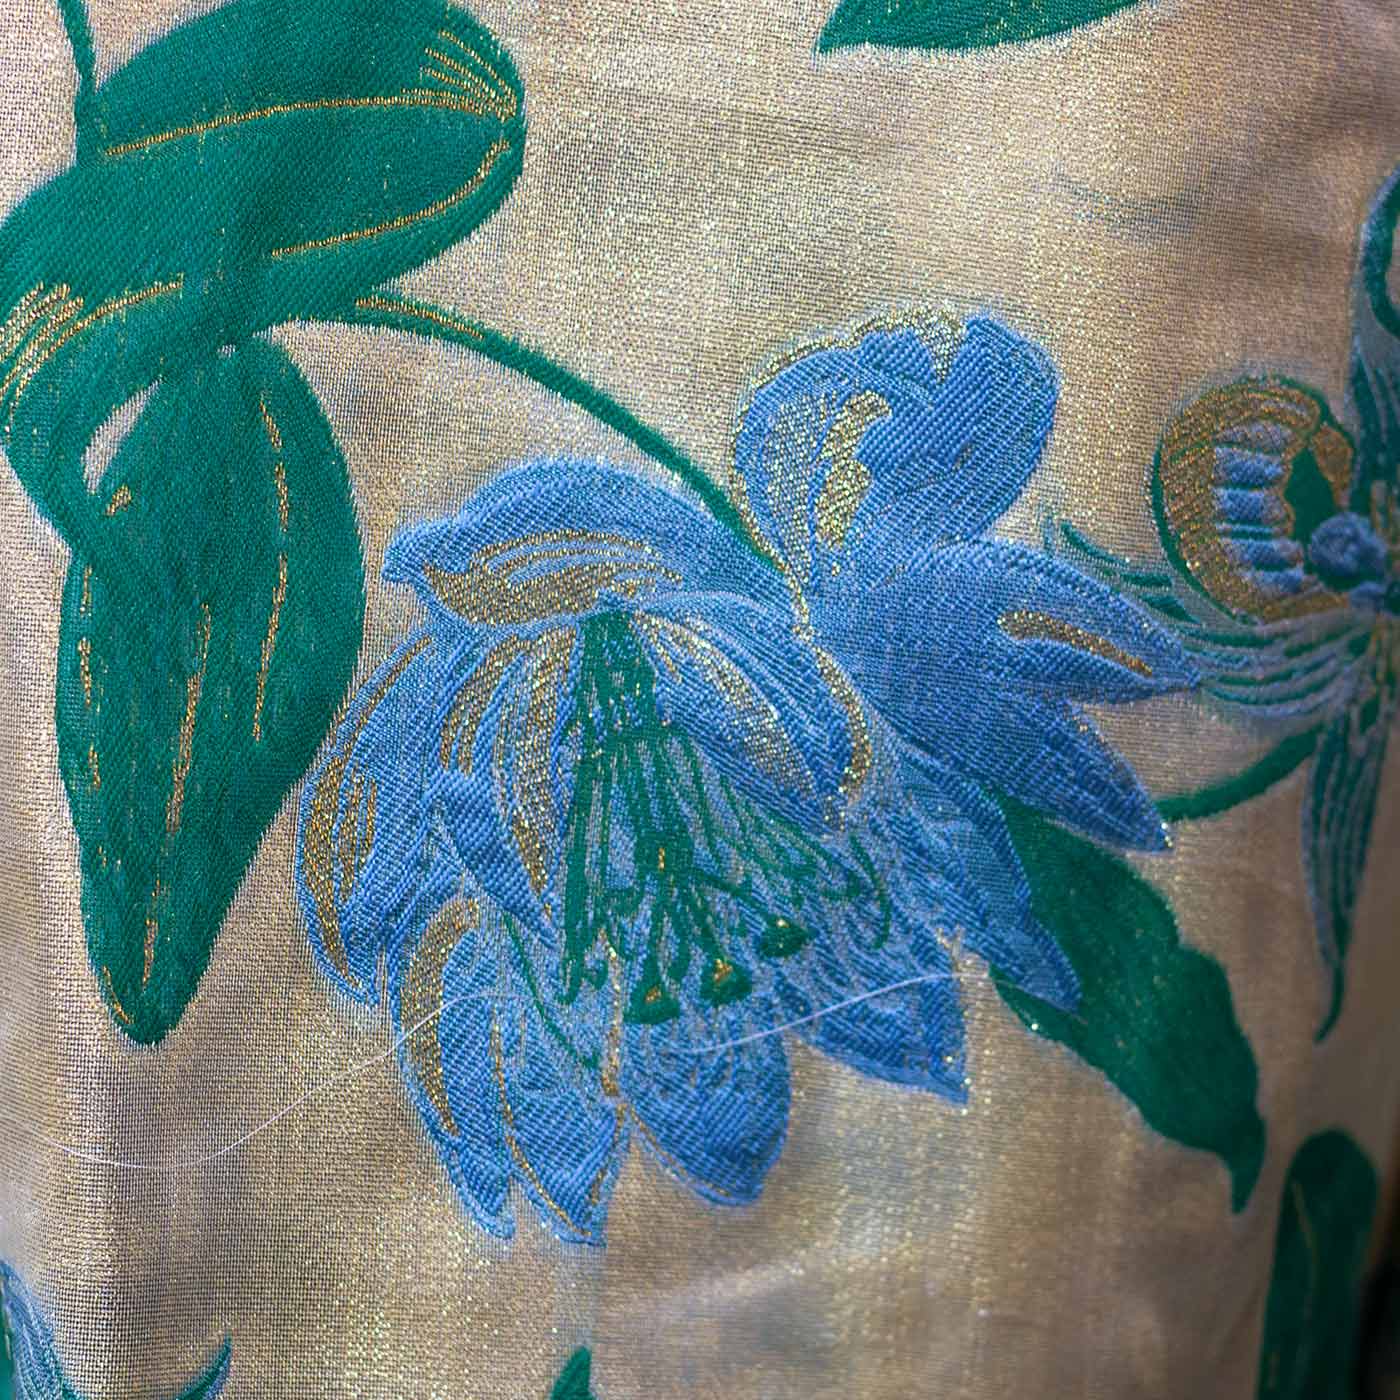 Green and Sky Blue on Gold Floral Brocade Fabric